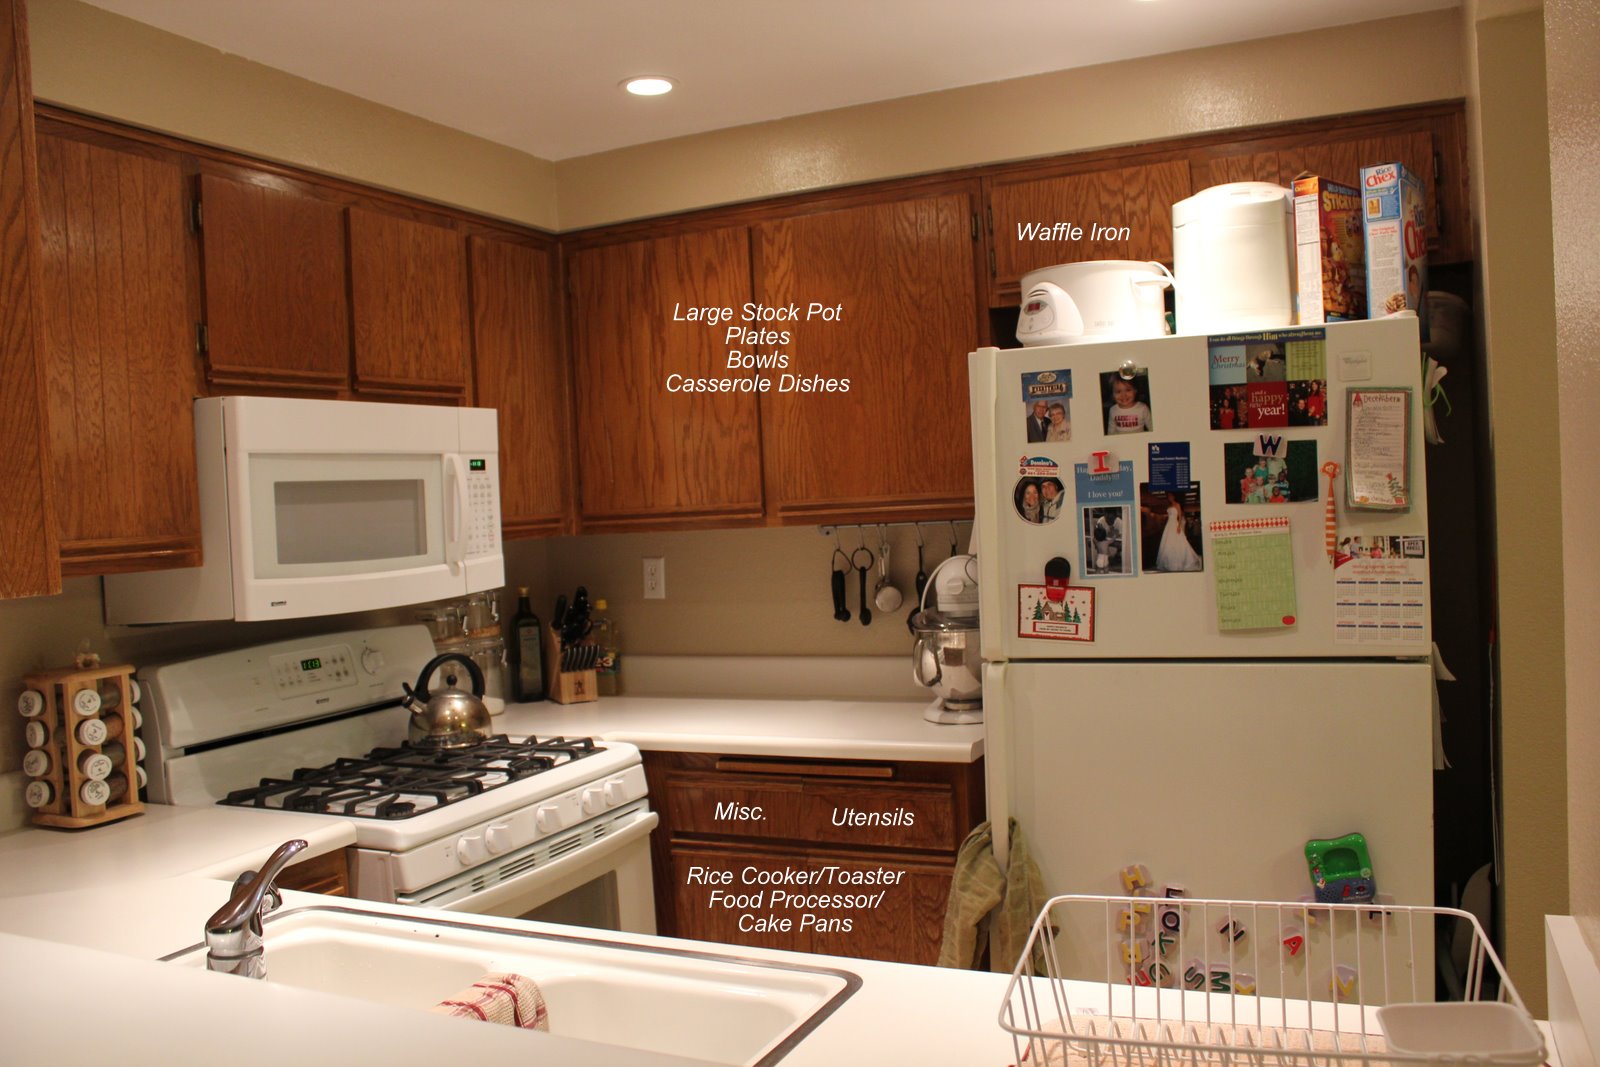 Where To Keep a Microwave in The Kitchen With a Small Countertop